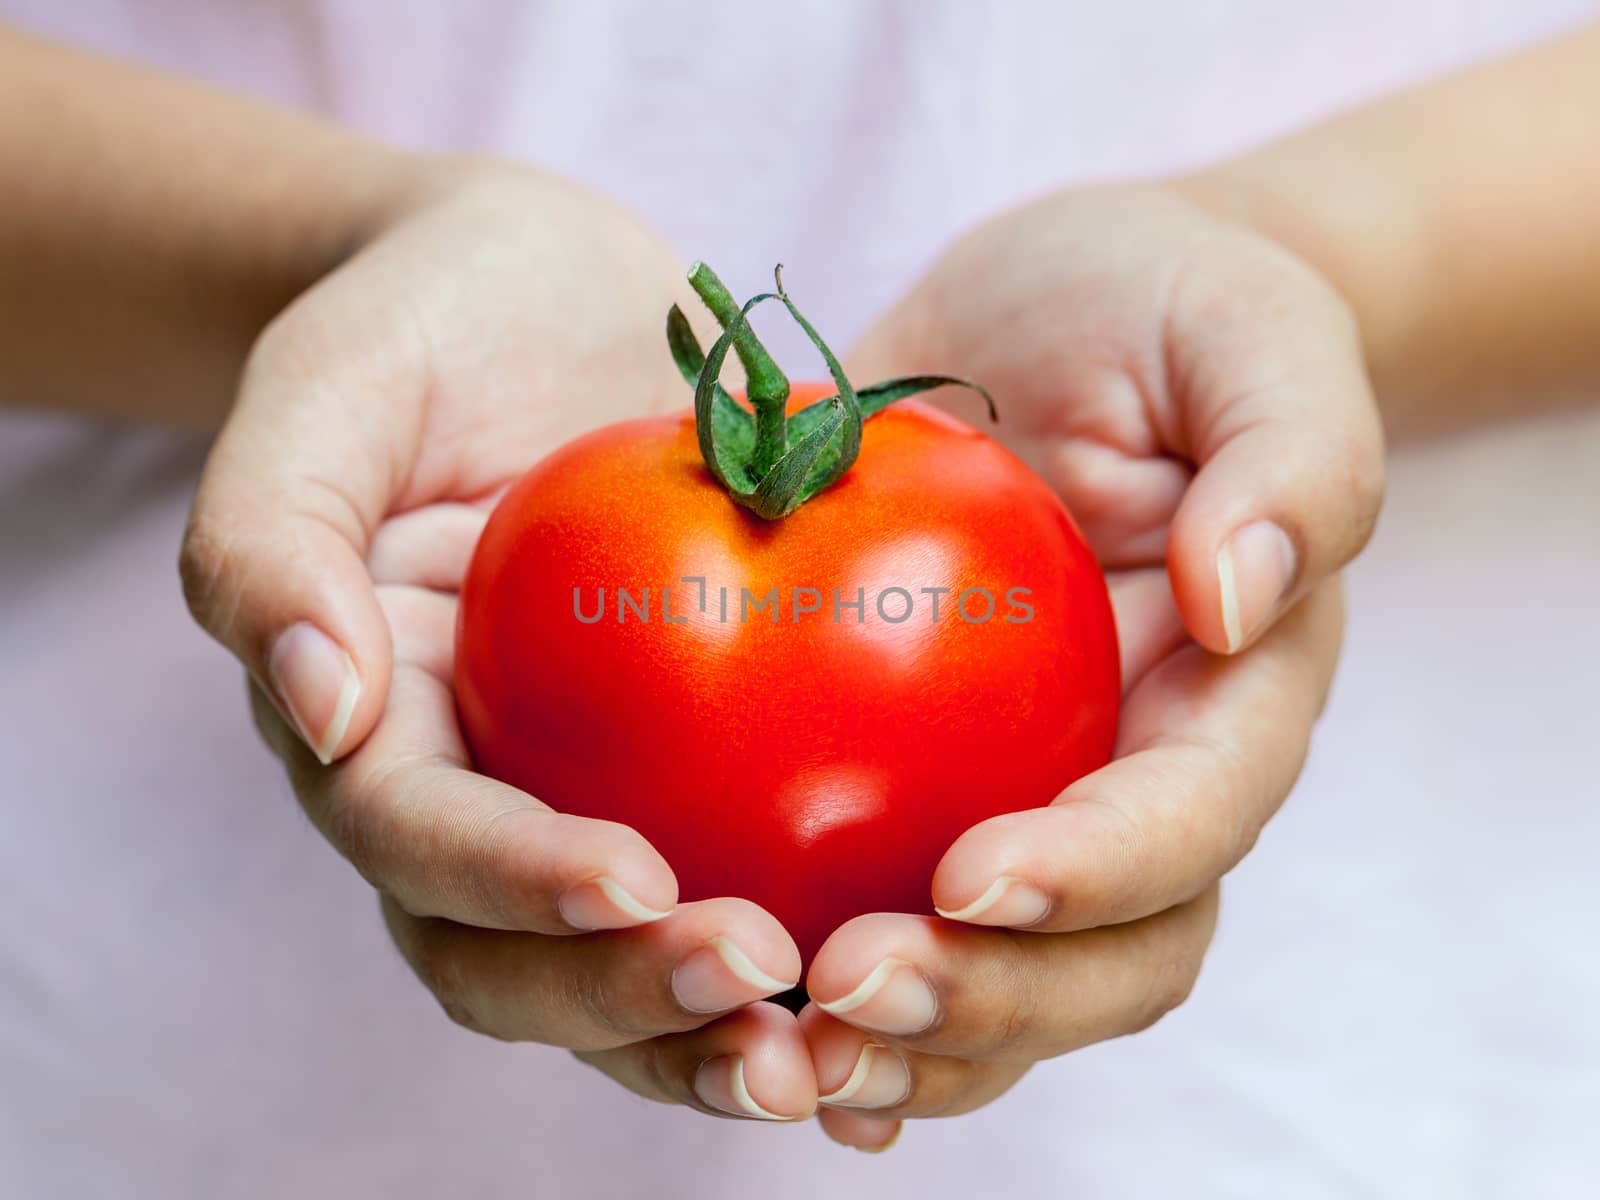 The Girl holding tomato. - Healthy food concept. by kerdkanno